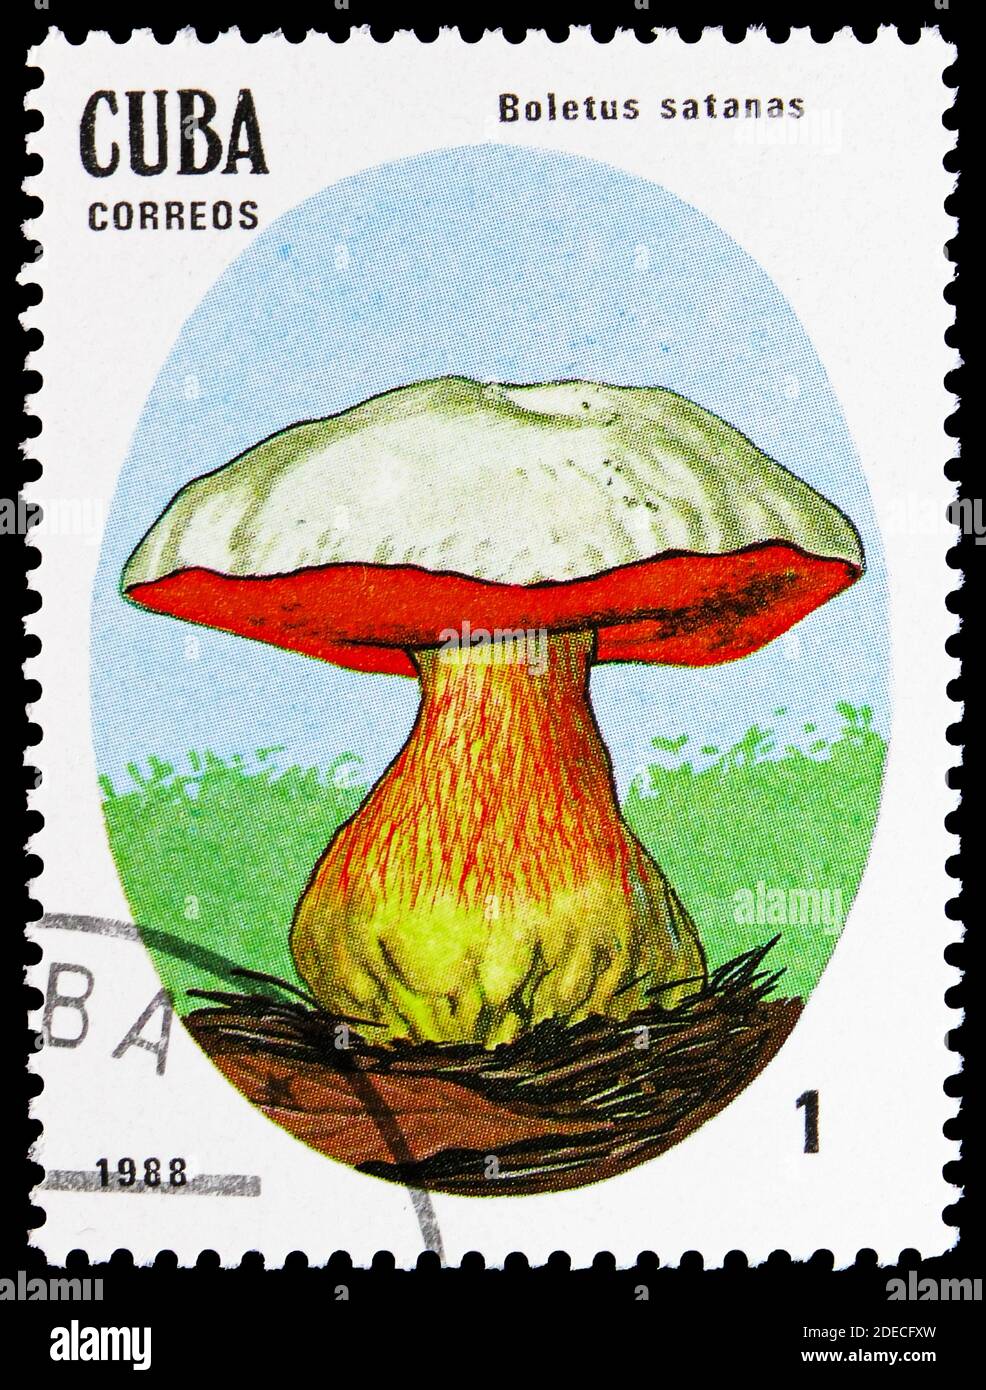 MOSCOW, RUSSIA - OCTOBER 17, 2020: Postage stamp printed in Cuba shows Boletus satanas, Mushrooms serie, circa 1988 Stock Photo